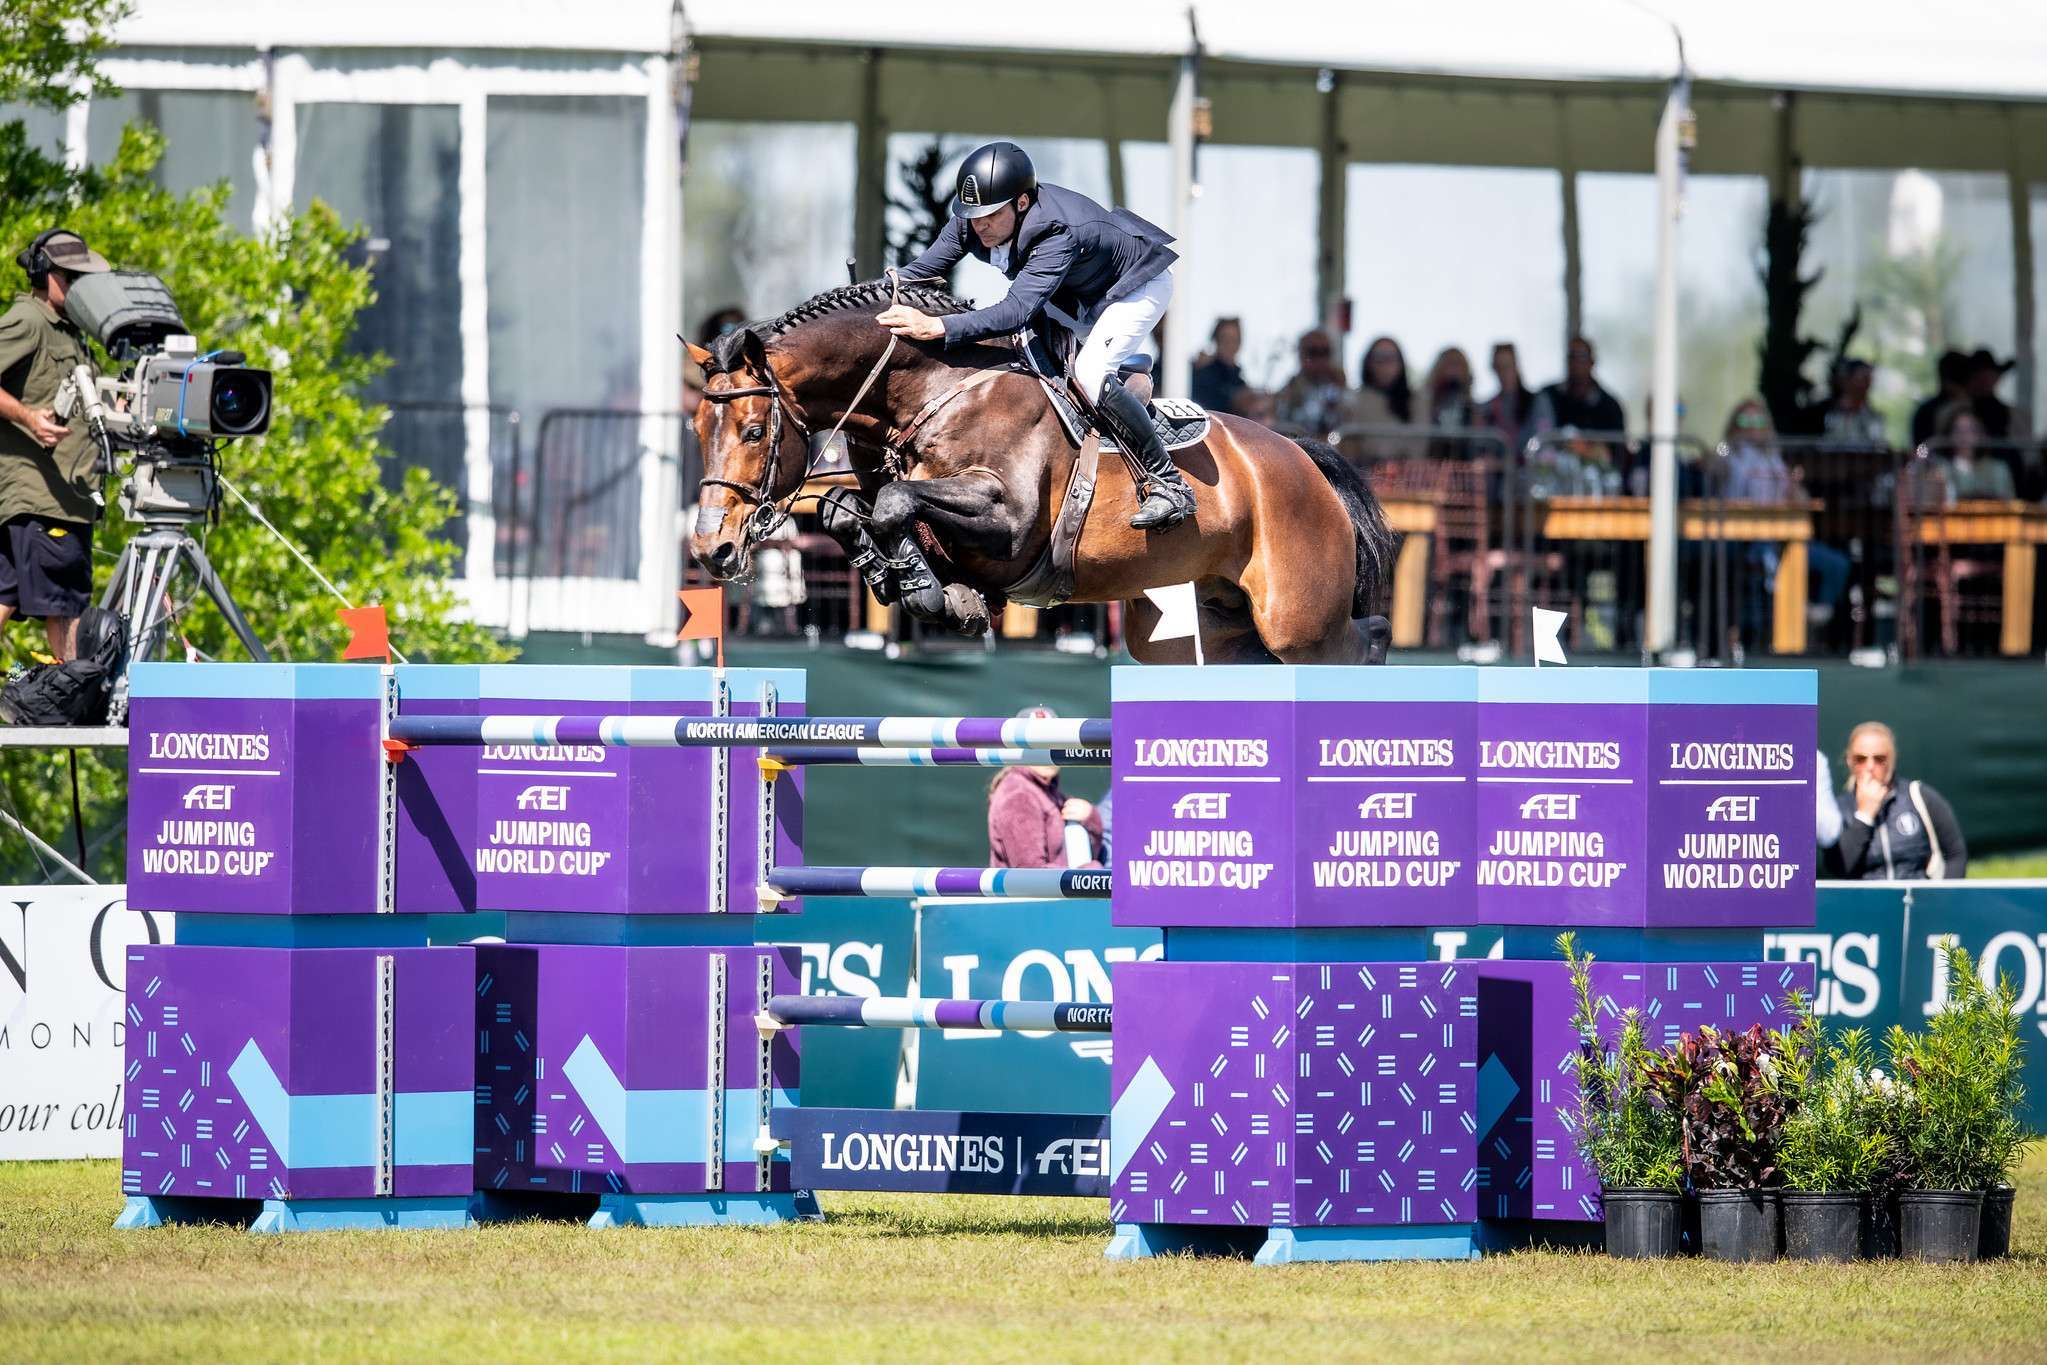 Santiago Lambre (BRA) riding Chacco Blue II - third place at the Longines FEI Jumping World Cup™ NAL 2022/23 - Ocala 
Copyright ©FEI/Shannon Brinkman